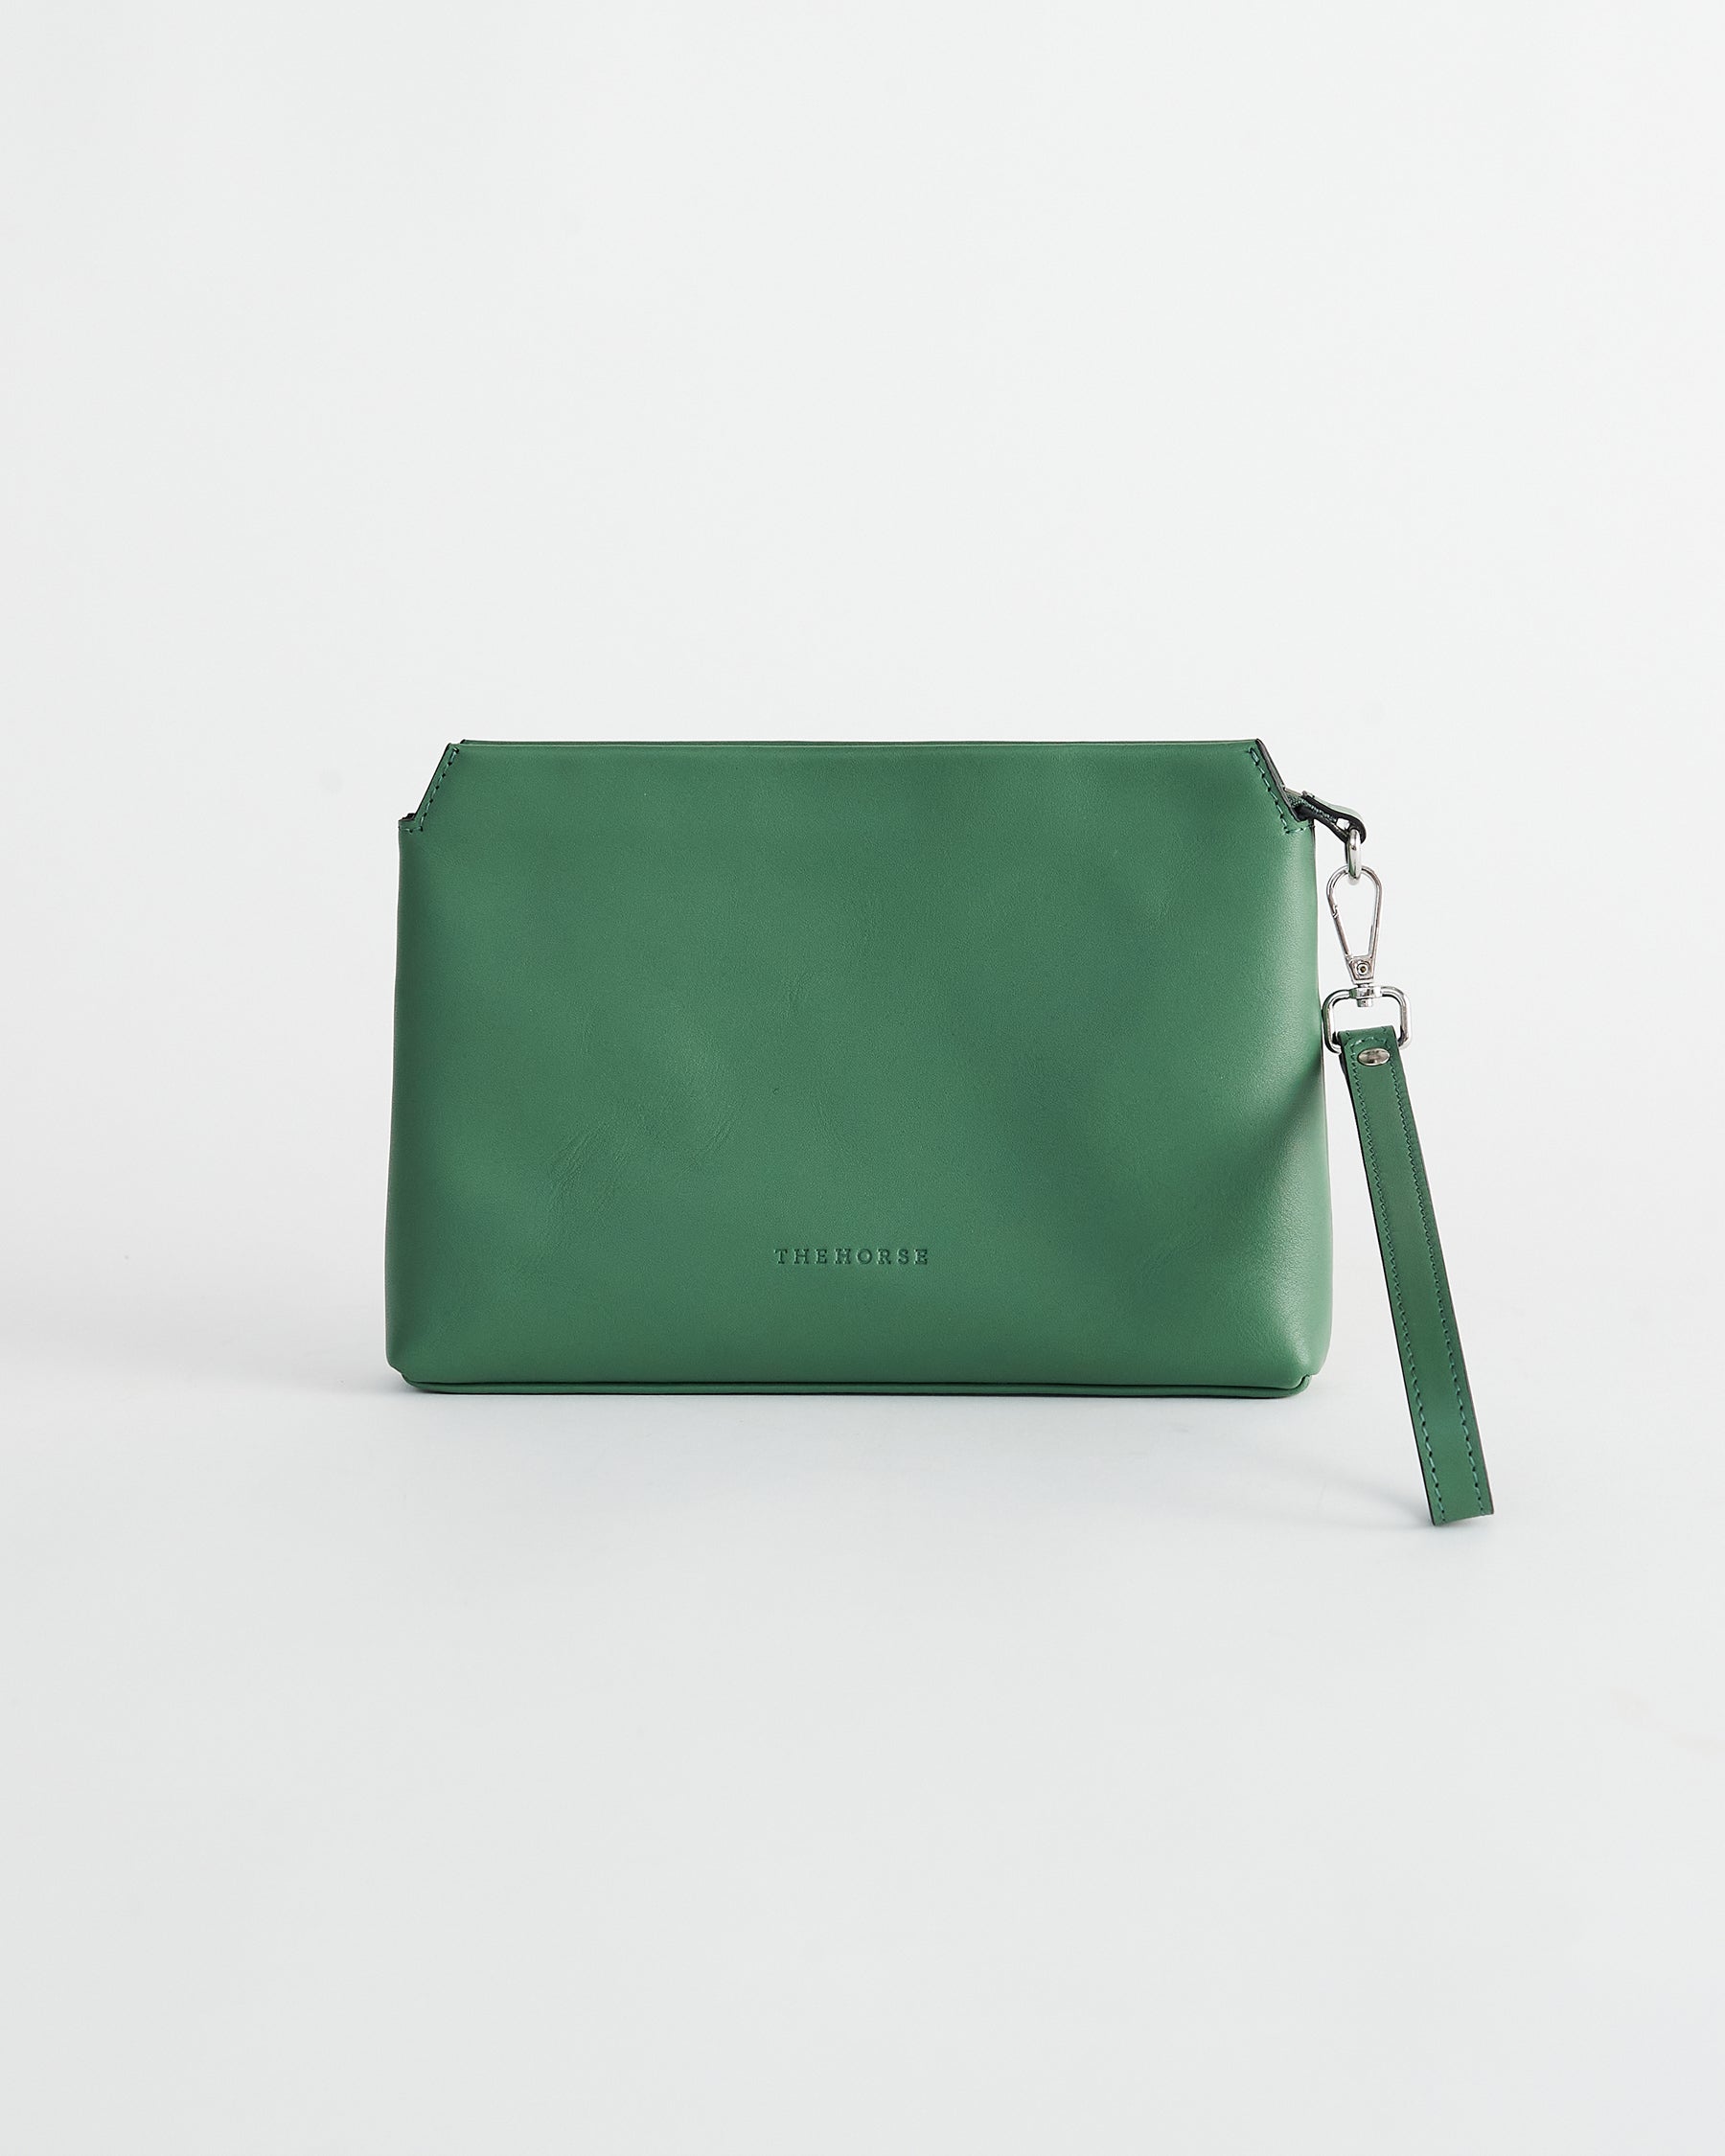 The Lola Smooth Leather Clutch in Forest Green by The Horse®